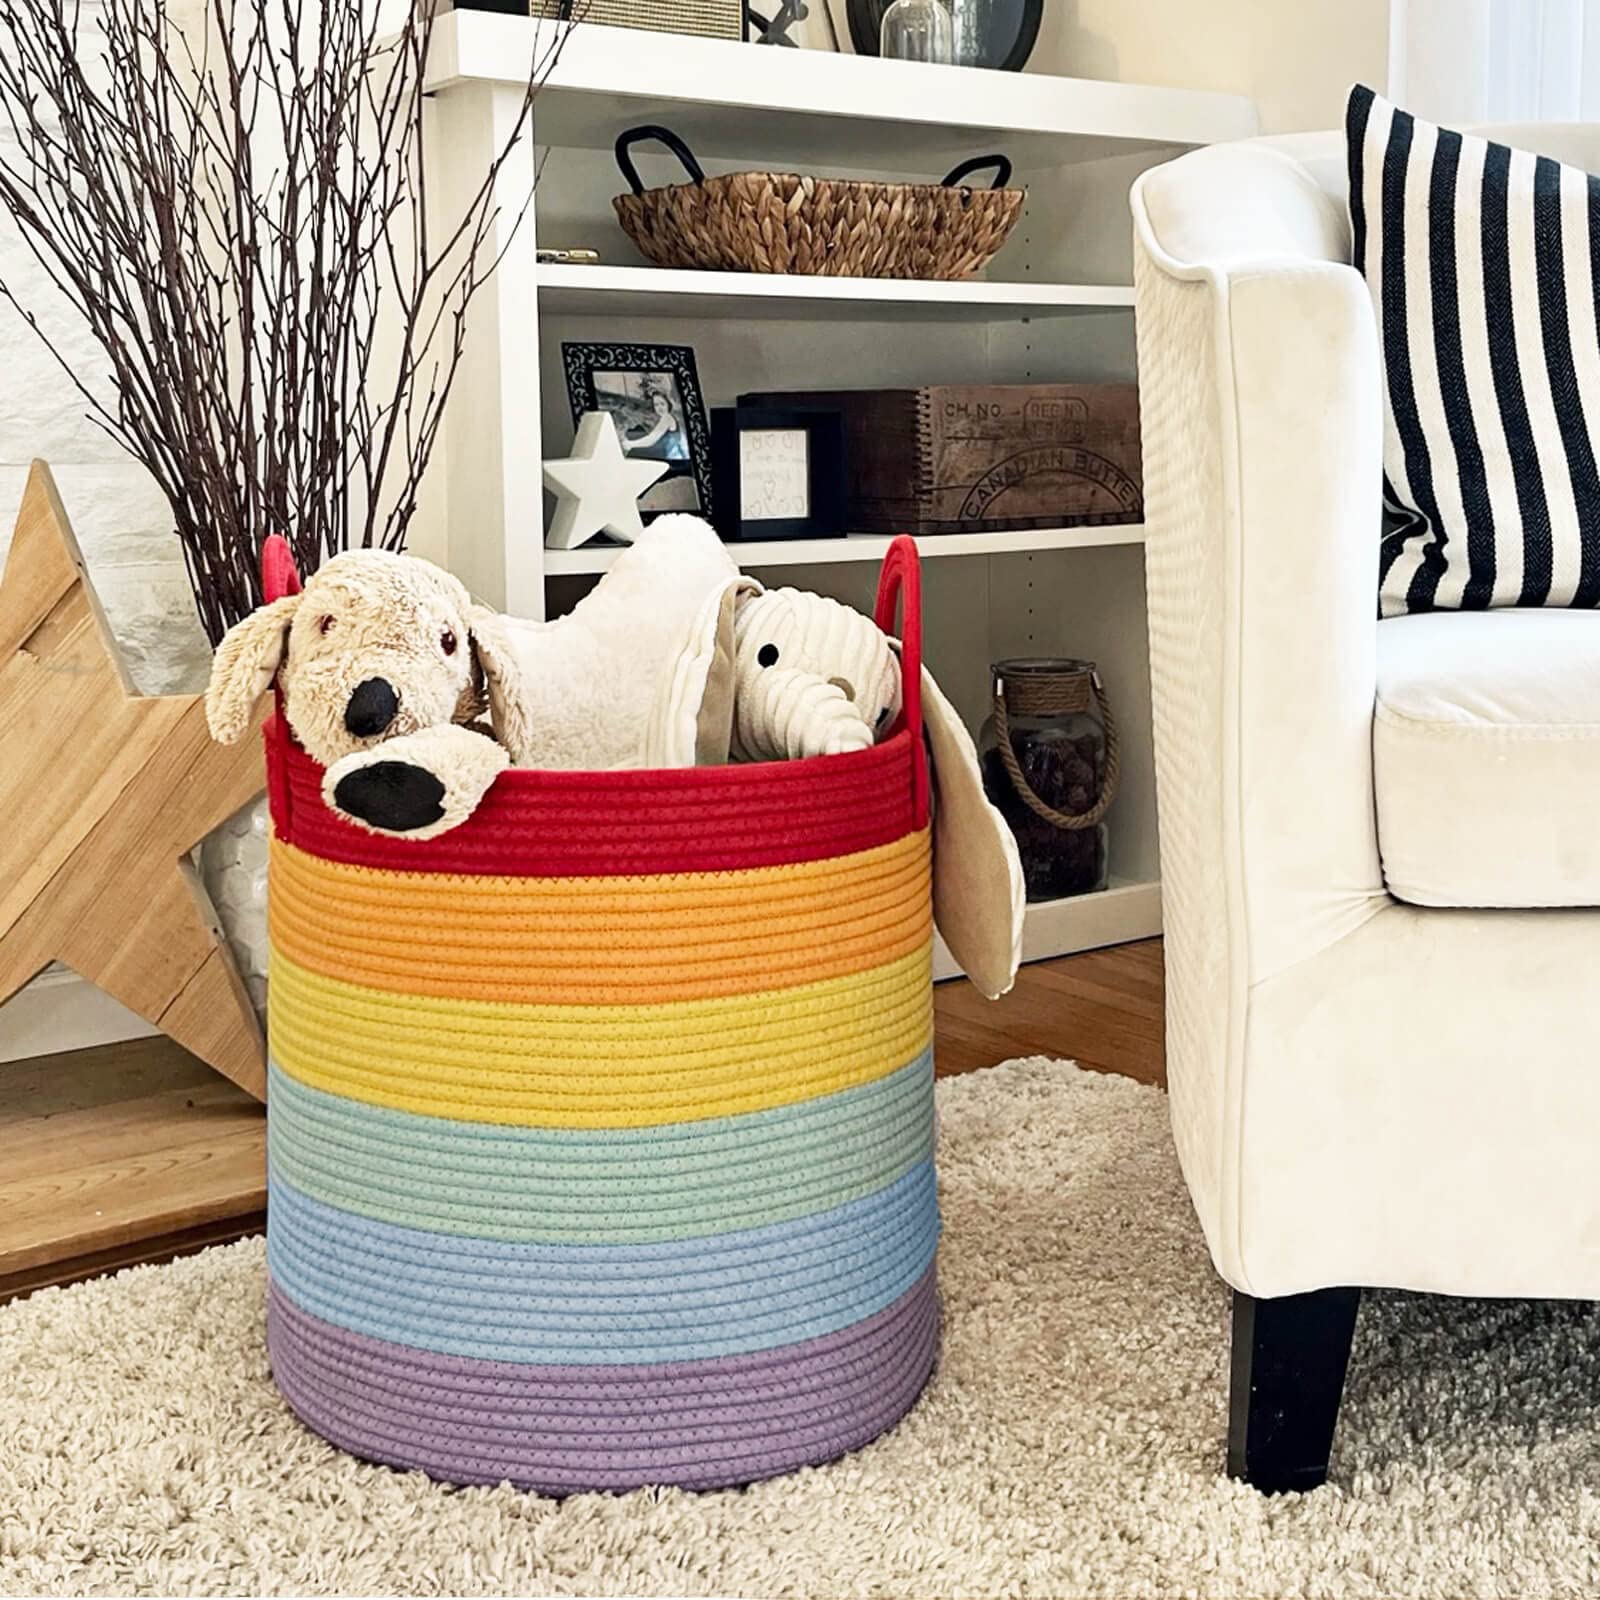 Goodpick Rainbow Laundry Basket, Baby Nursery Hamper, Decorative Storage Basket for Kids, Woven Cotton Rope Basket, Tall Basket with Handles, Colorful Gift Basket, 15 x 14 Inches